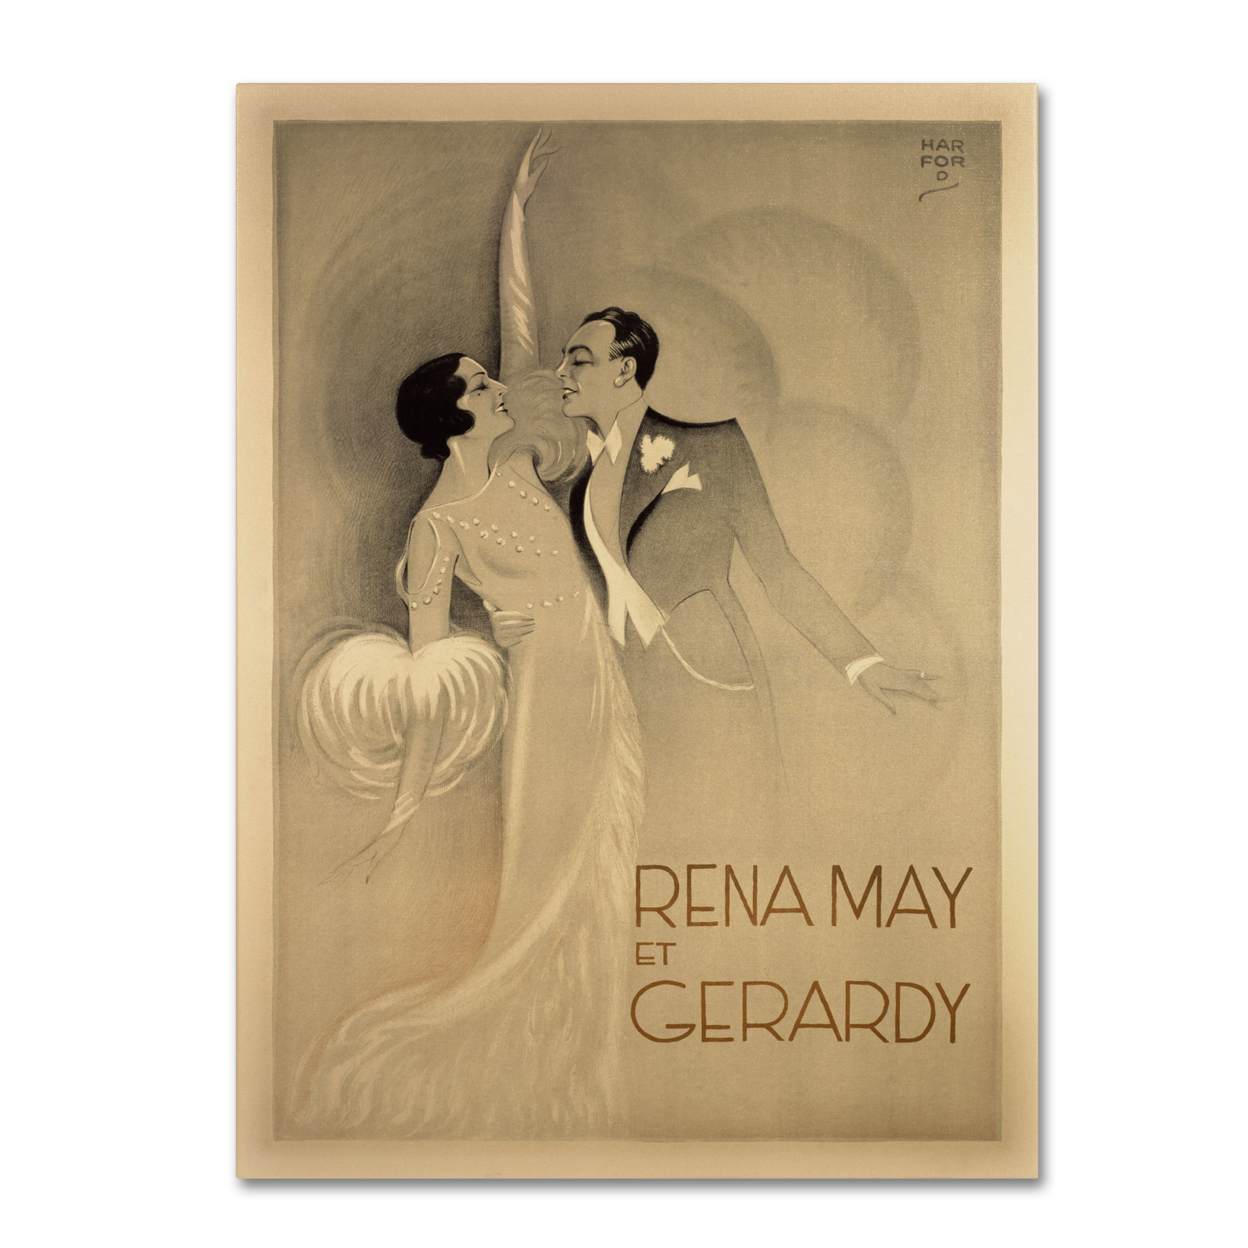 Rena May Et Gerardy' Canvas Wall Art 35 X 47 Inches